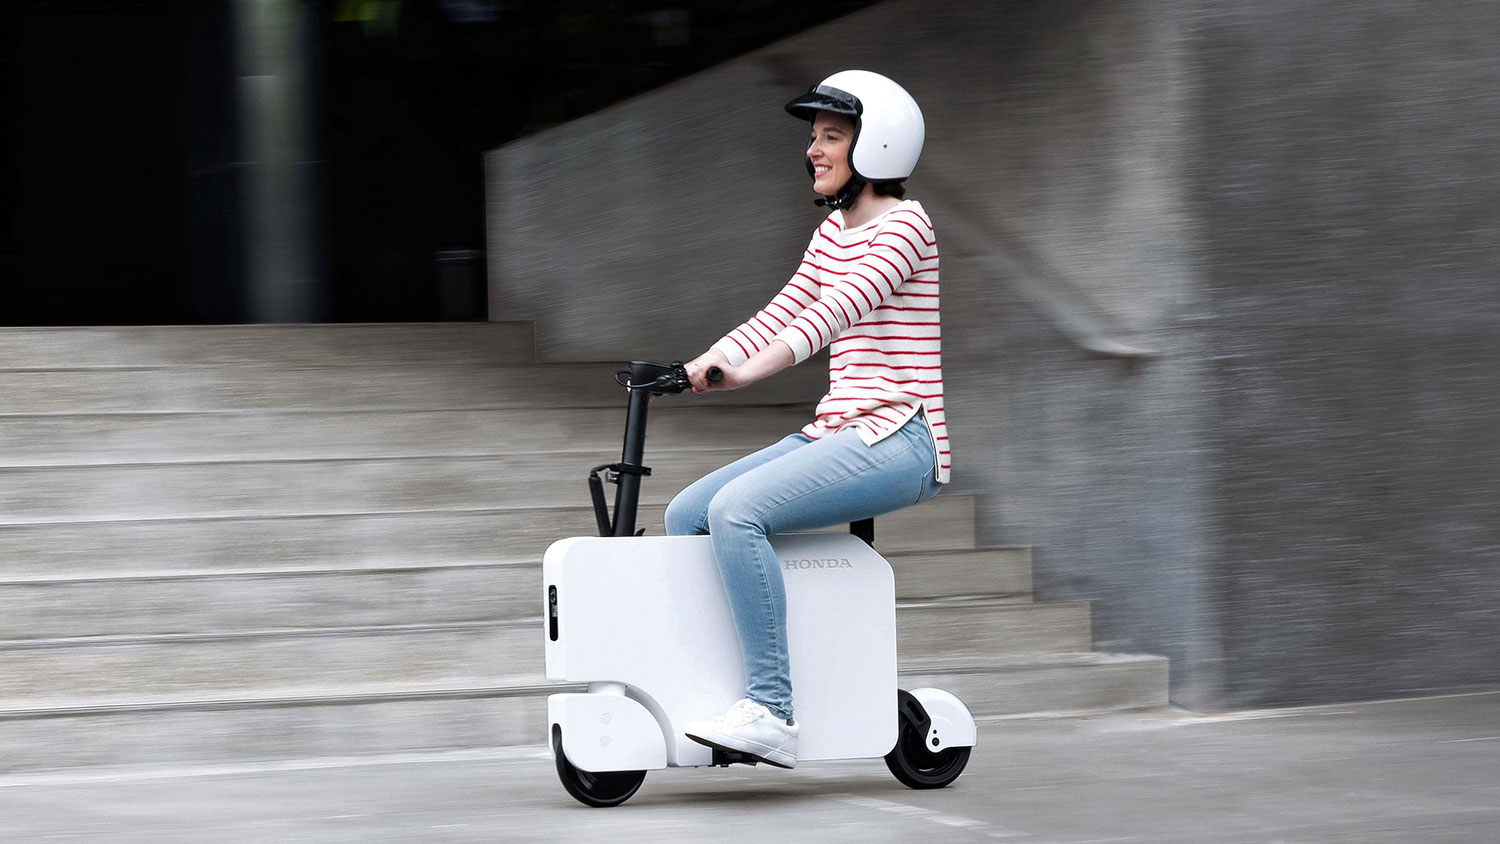 Motocompacto is a fun, fresh take on e-scooters with sleek and simple styling and an innovative, ultra-compact foldable design.